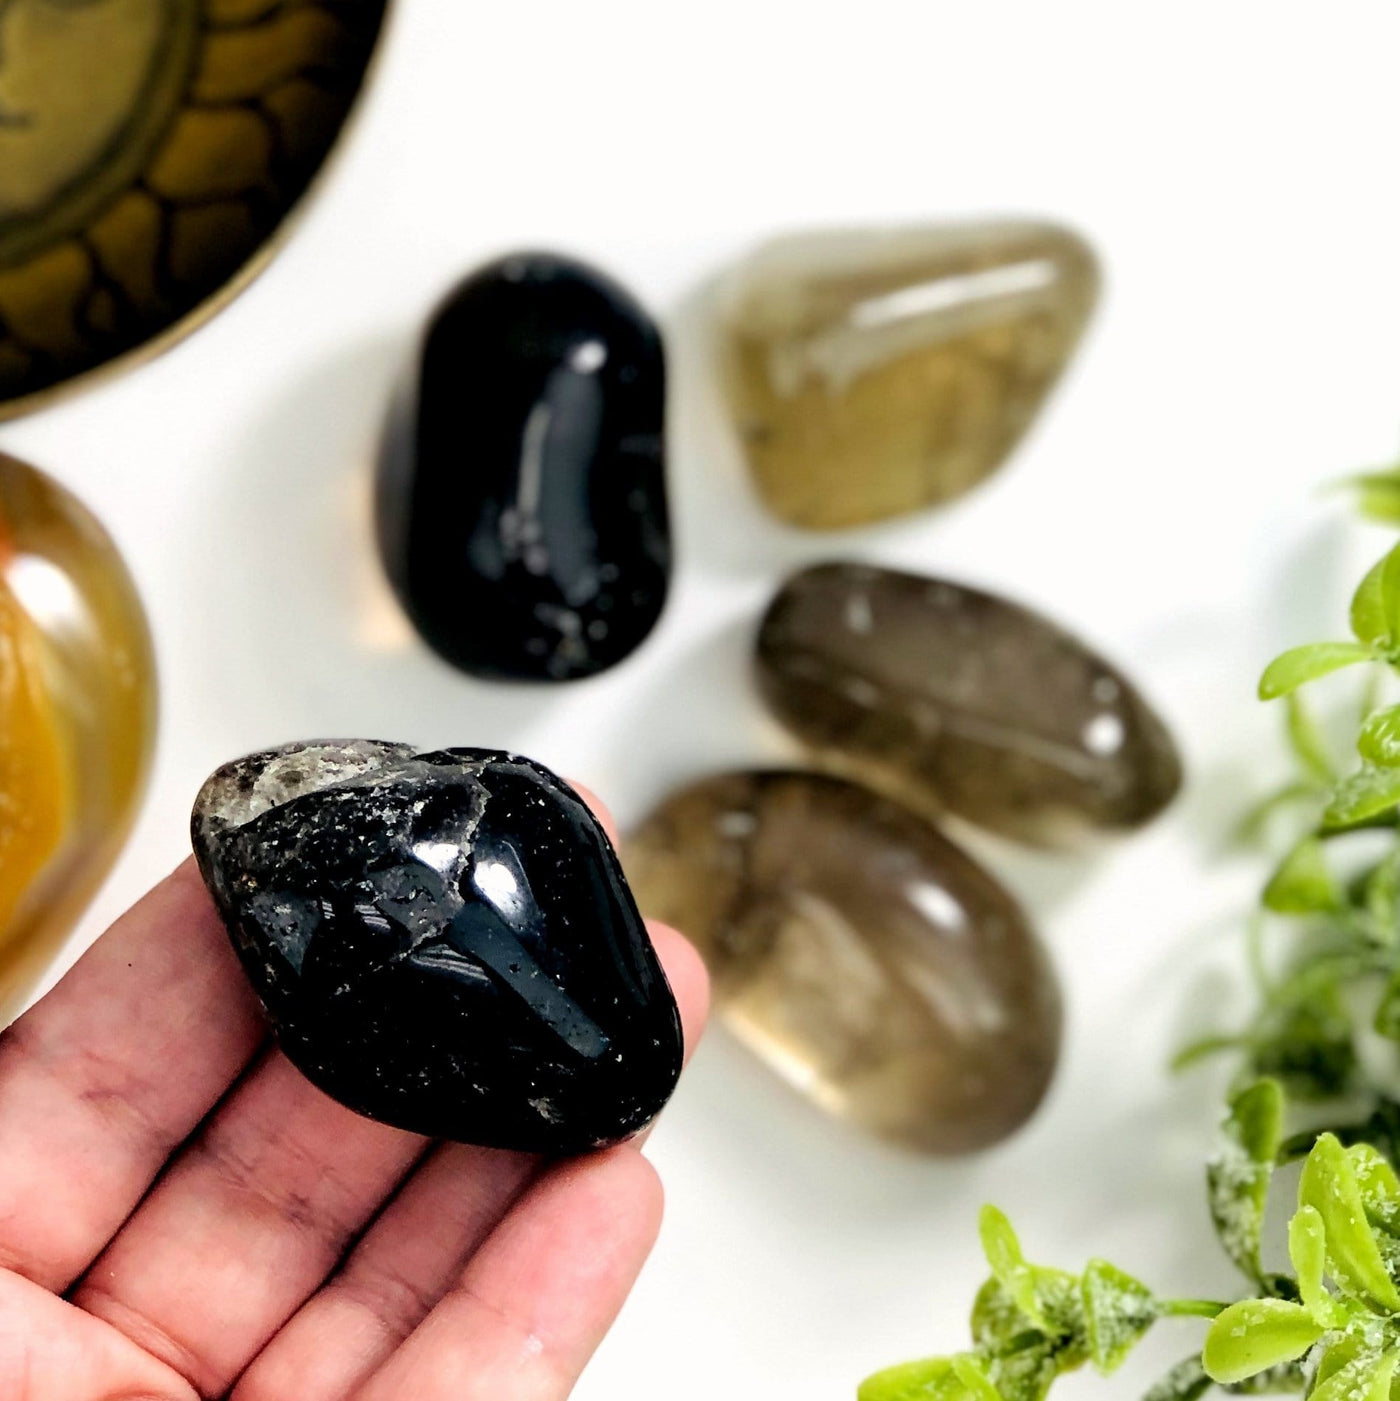 One Black Tumbled Smokey Quartz being lifted by a hand while other stones are out of focus